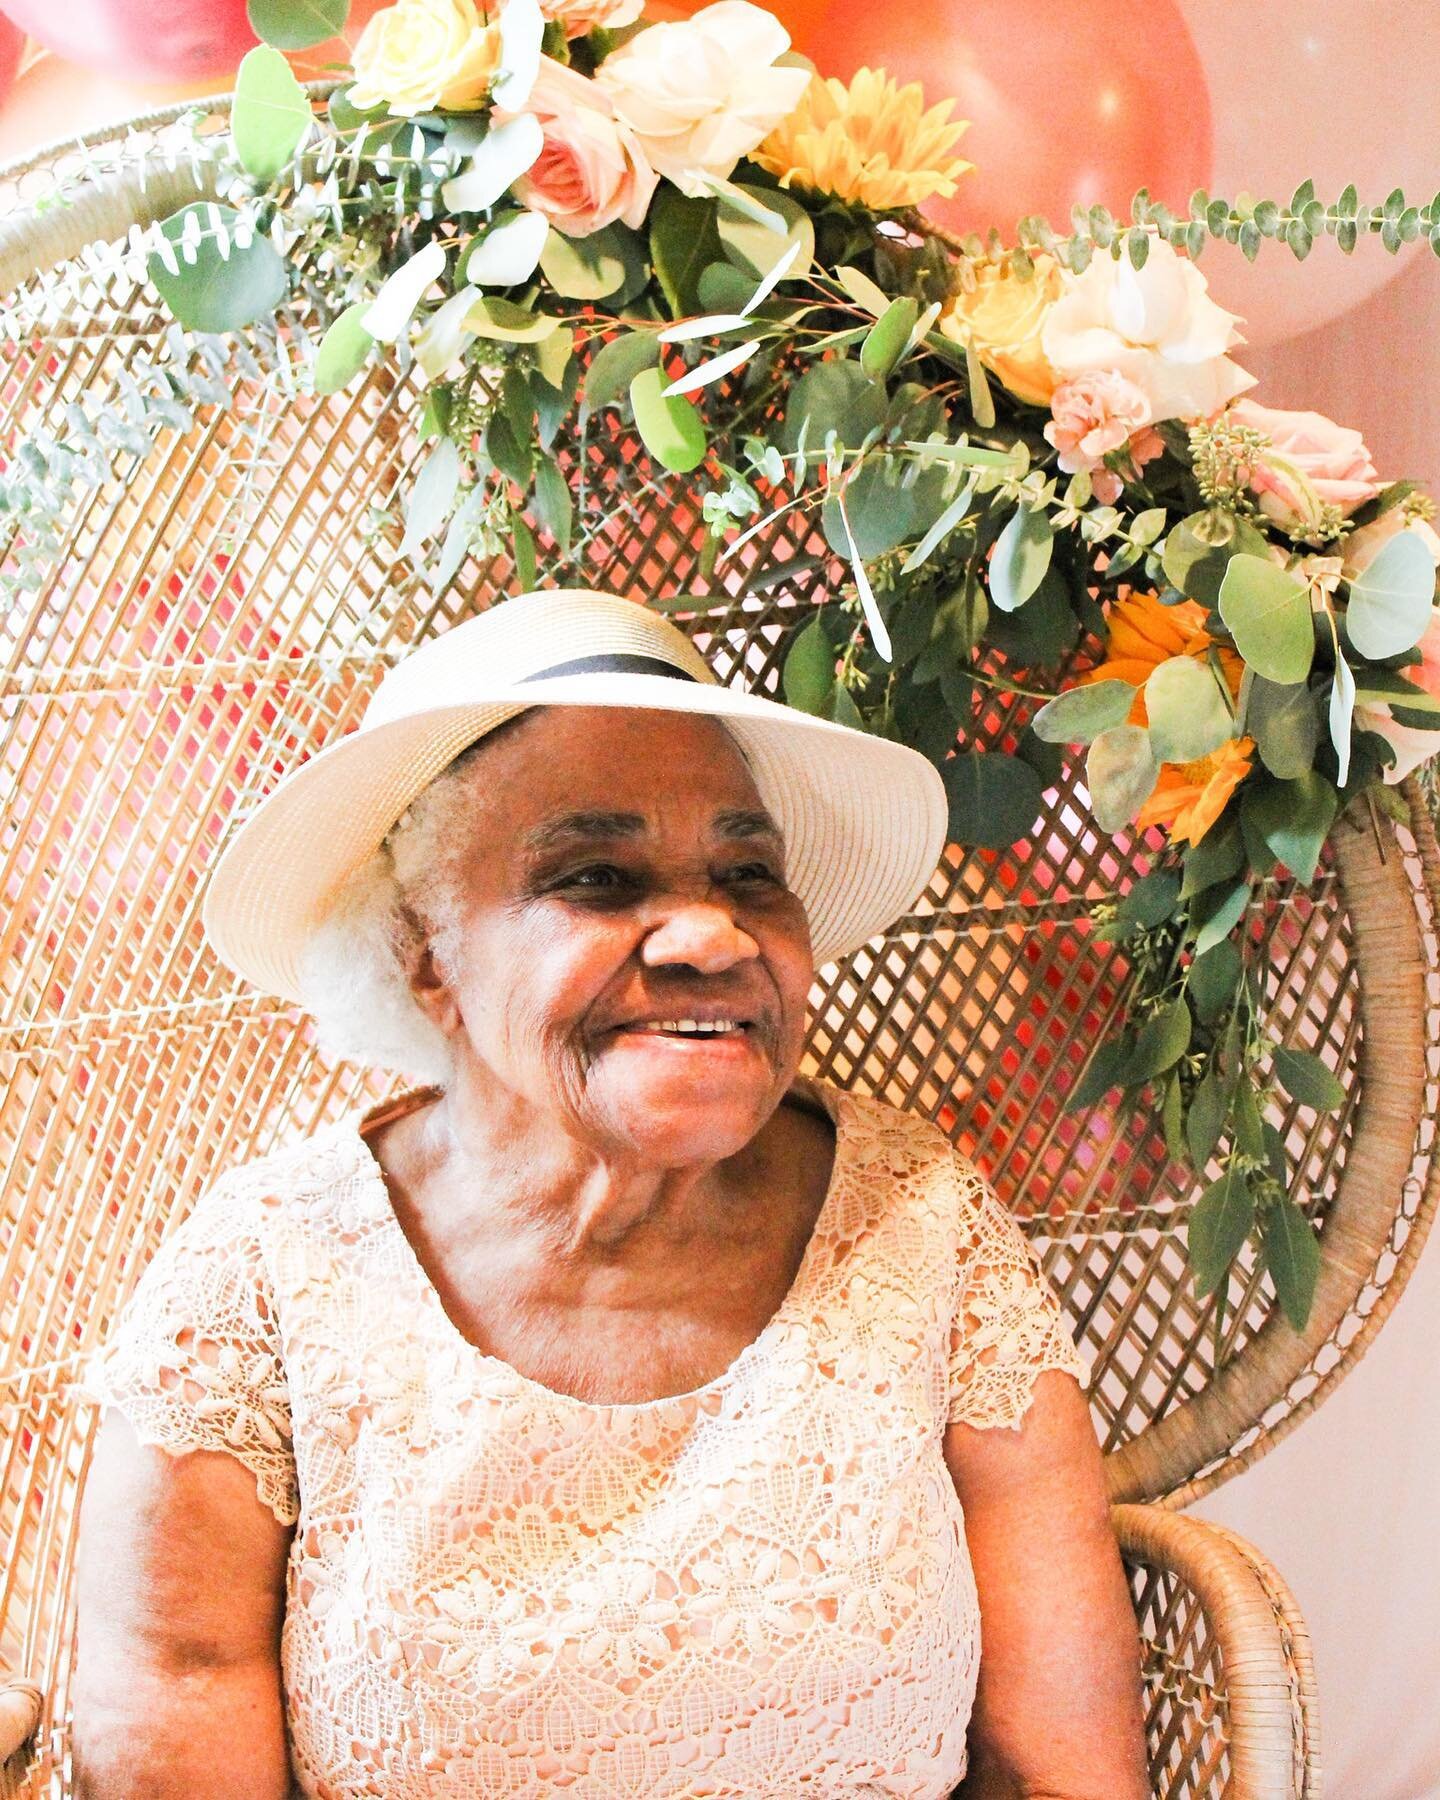 This amazing woman and her 90th birthday on the blog 🌻 

Link in bio ✨ Happy weekend!

📸 @jaqiesevents 

&bull;
&bull;
&bull;
&bull;
&bull;
#blogger #momblogger #eventblog #birthday #90yearsold #90thbirthday #90yearsyoung #women #strongwomen #women